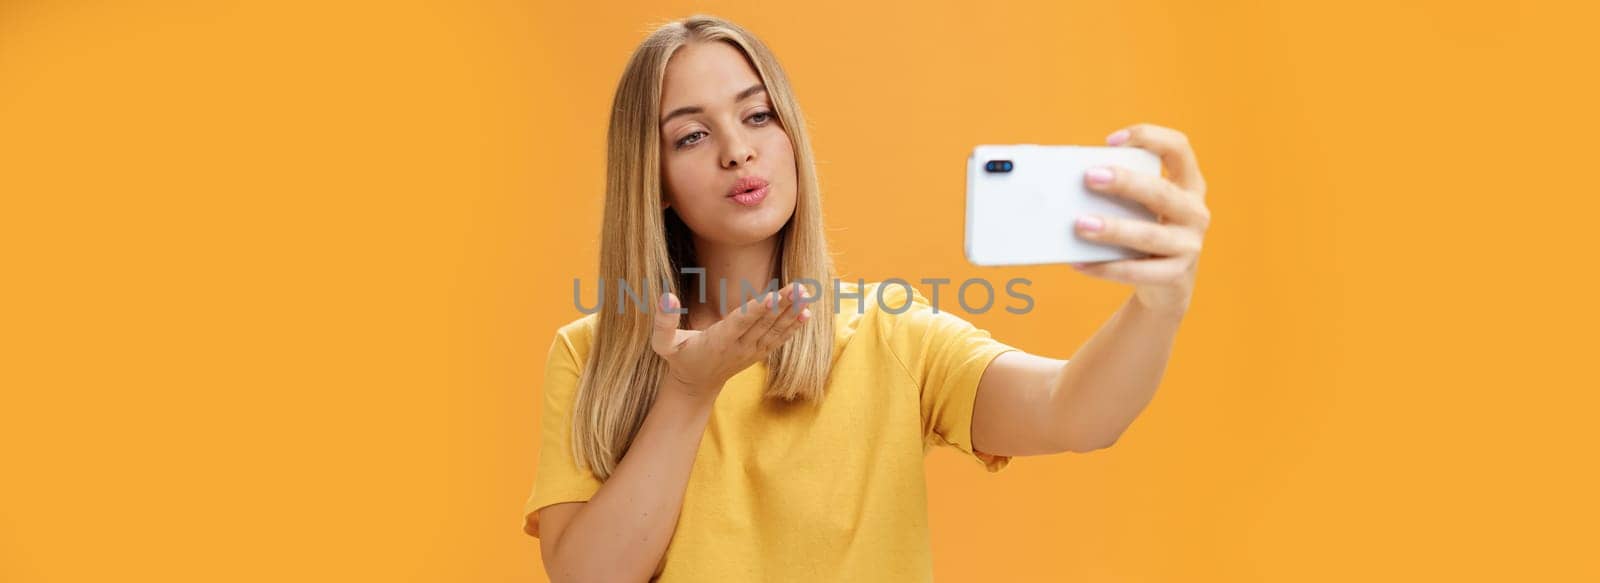 Stylish glamourous female fashion blogger ending recording video via smartphone by sending air kiss at camera, taking selfie with sensual and confident gaze at screen posing over orange wall. Lifestyle, blogger, van life concept